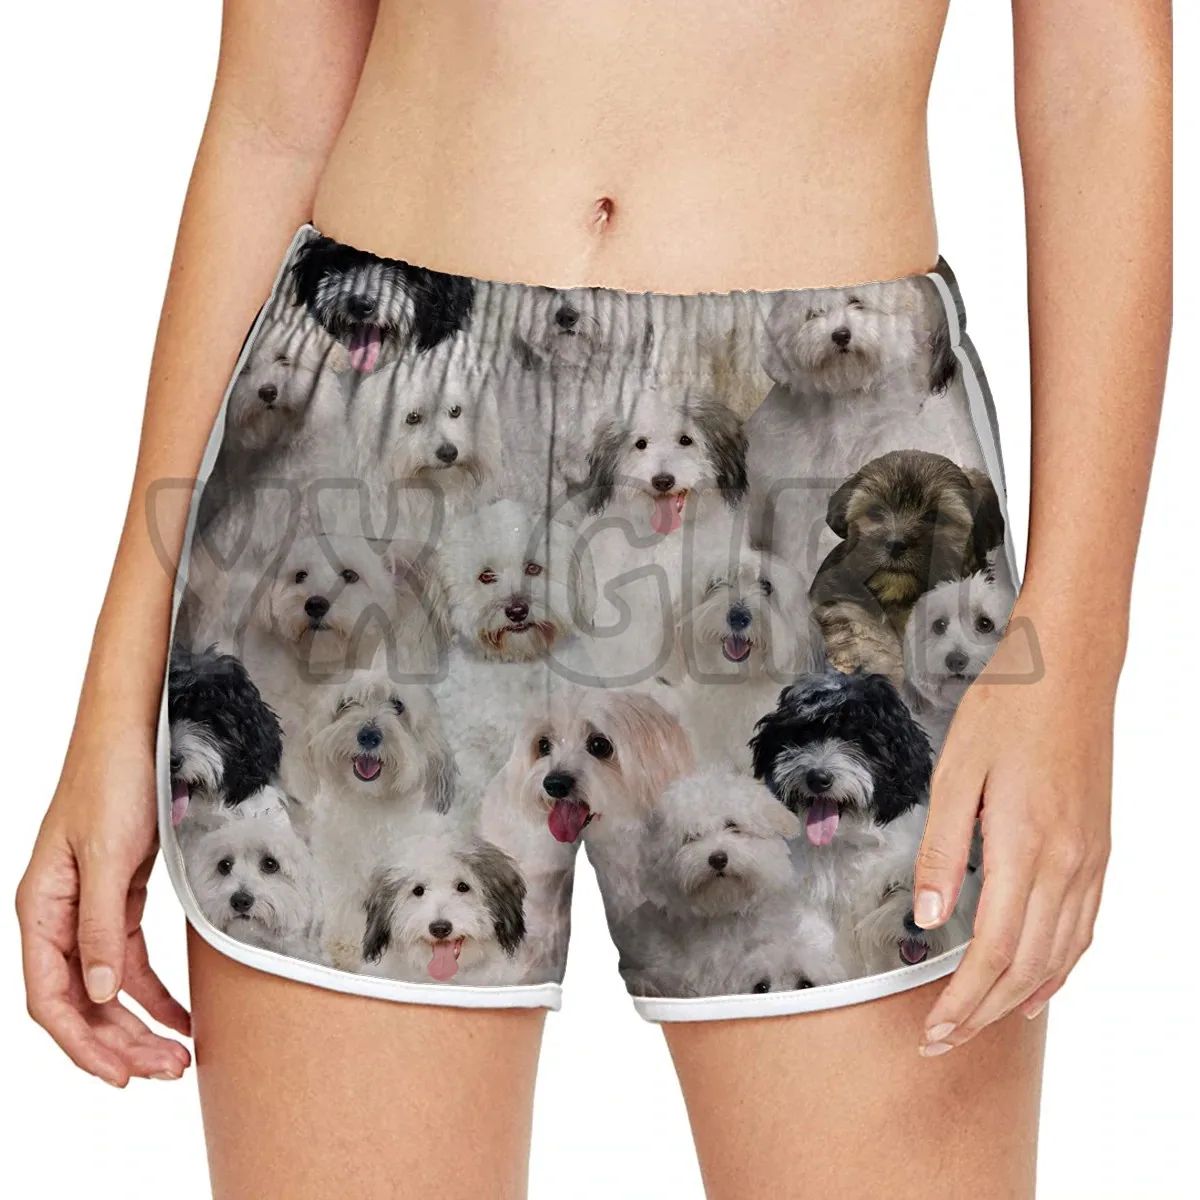 You get a lot of Cockapoos   Women's Shorts 3D All Over Printed Shorts Quick Drying Beach Shorts Summer Beach Swim Trunks